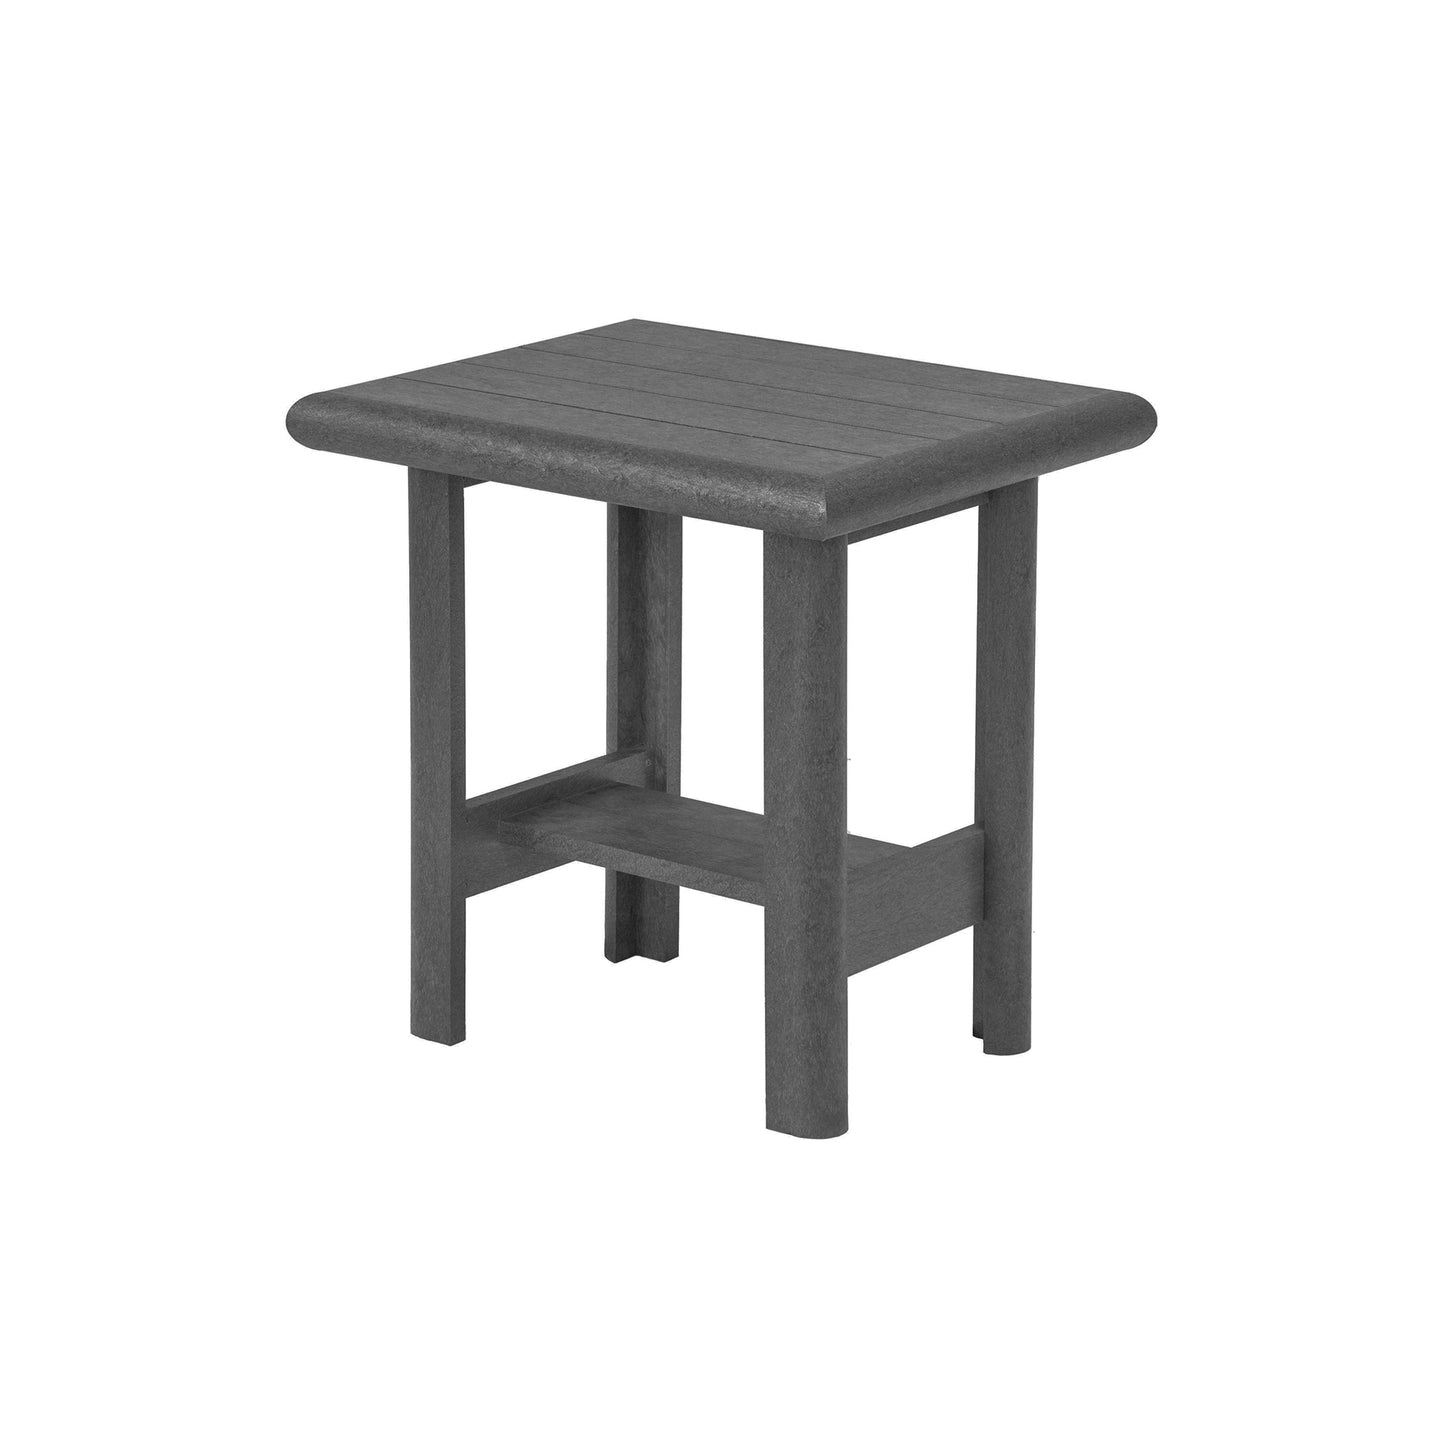 C.R.P. Stratford End Table in Slate Grey